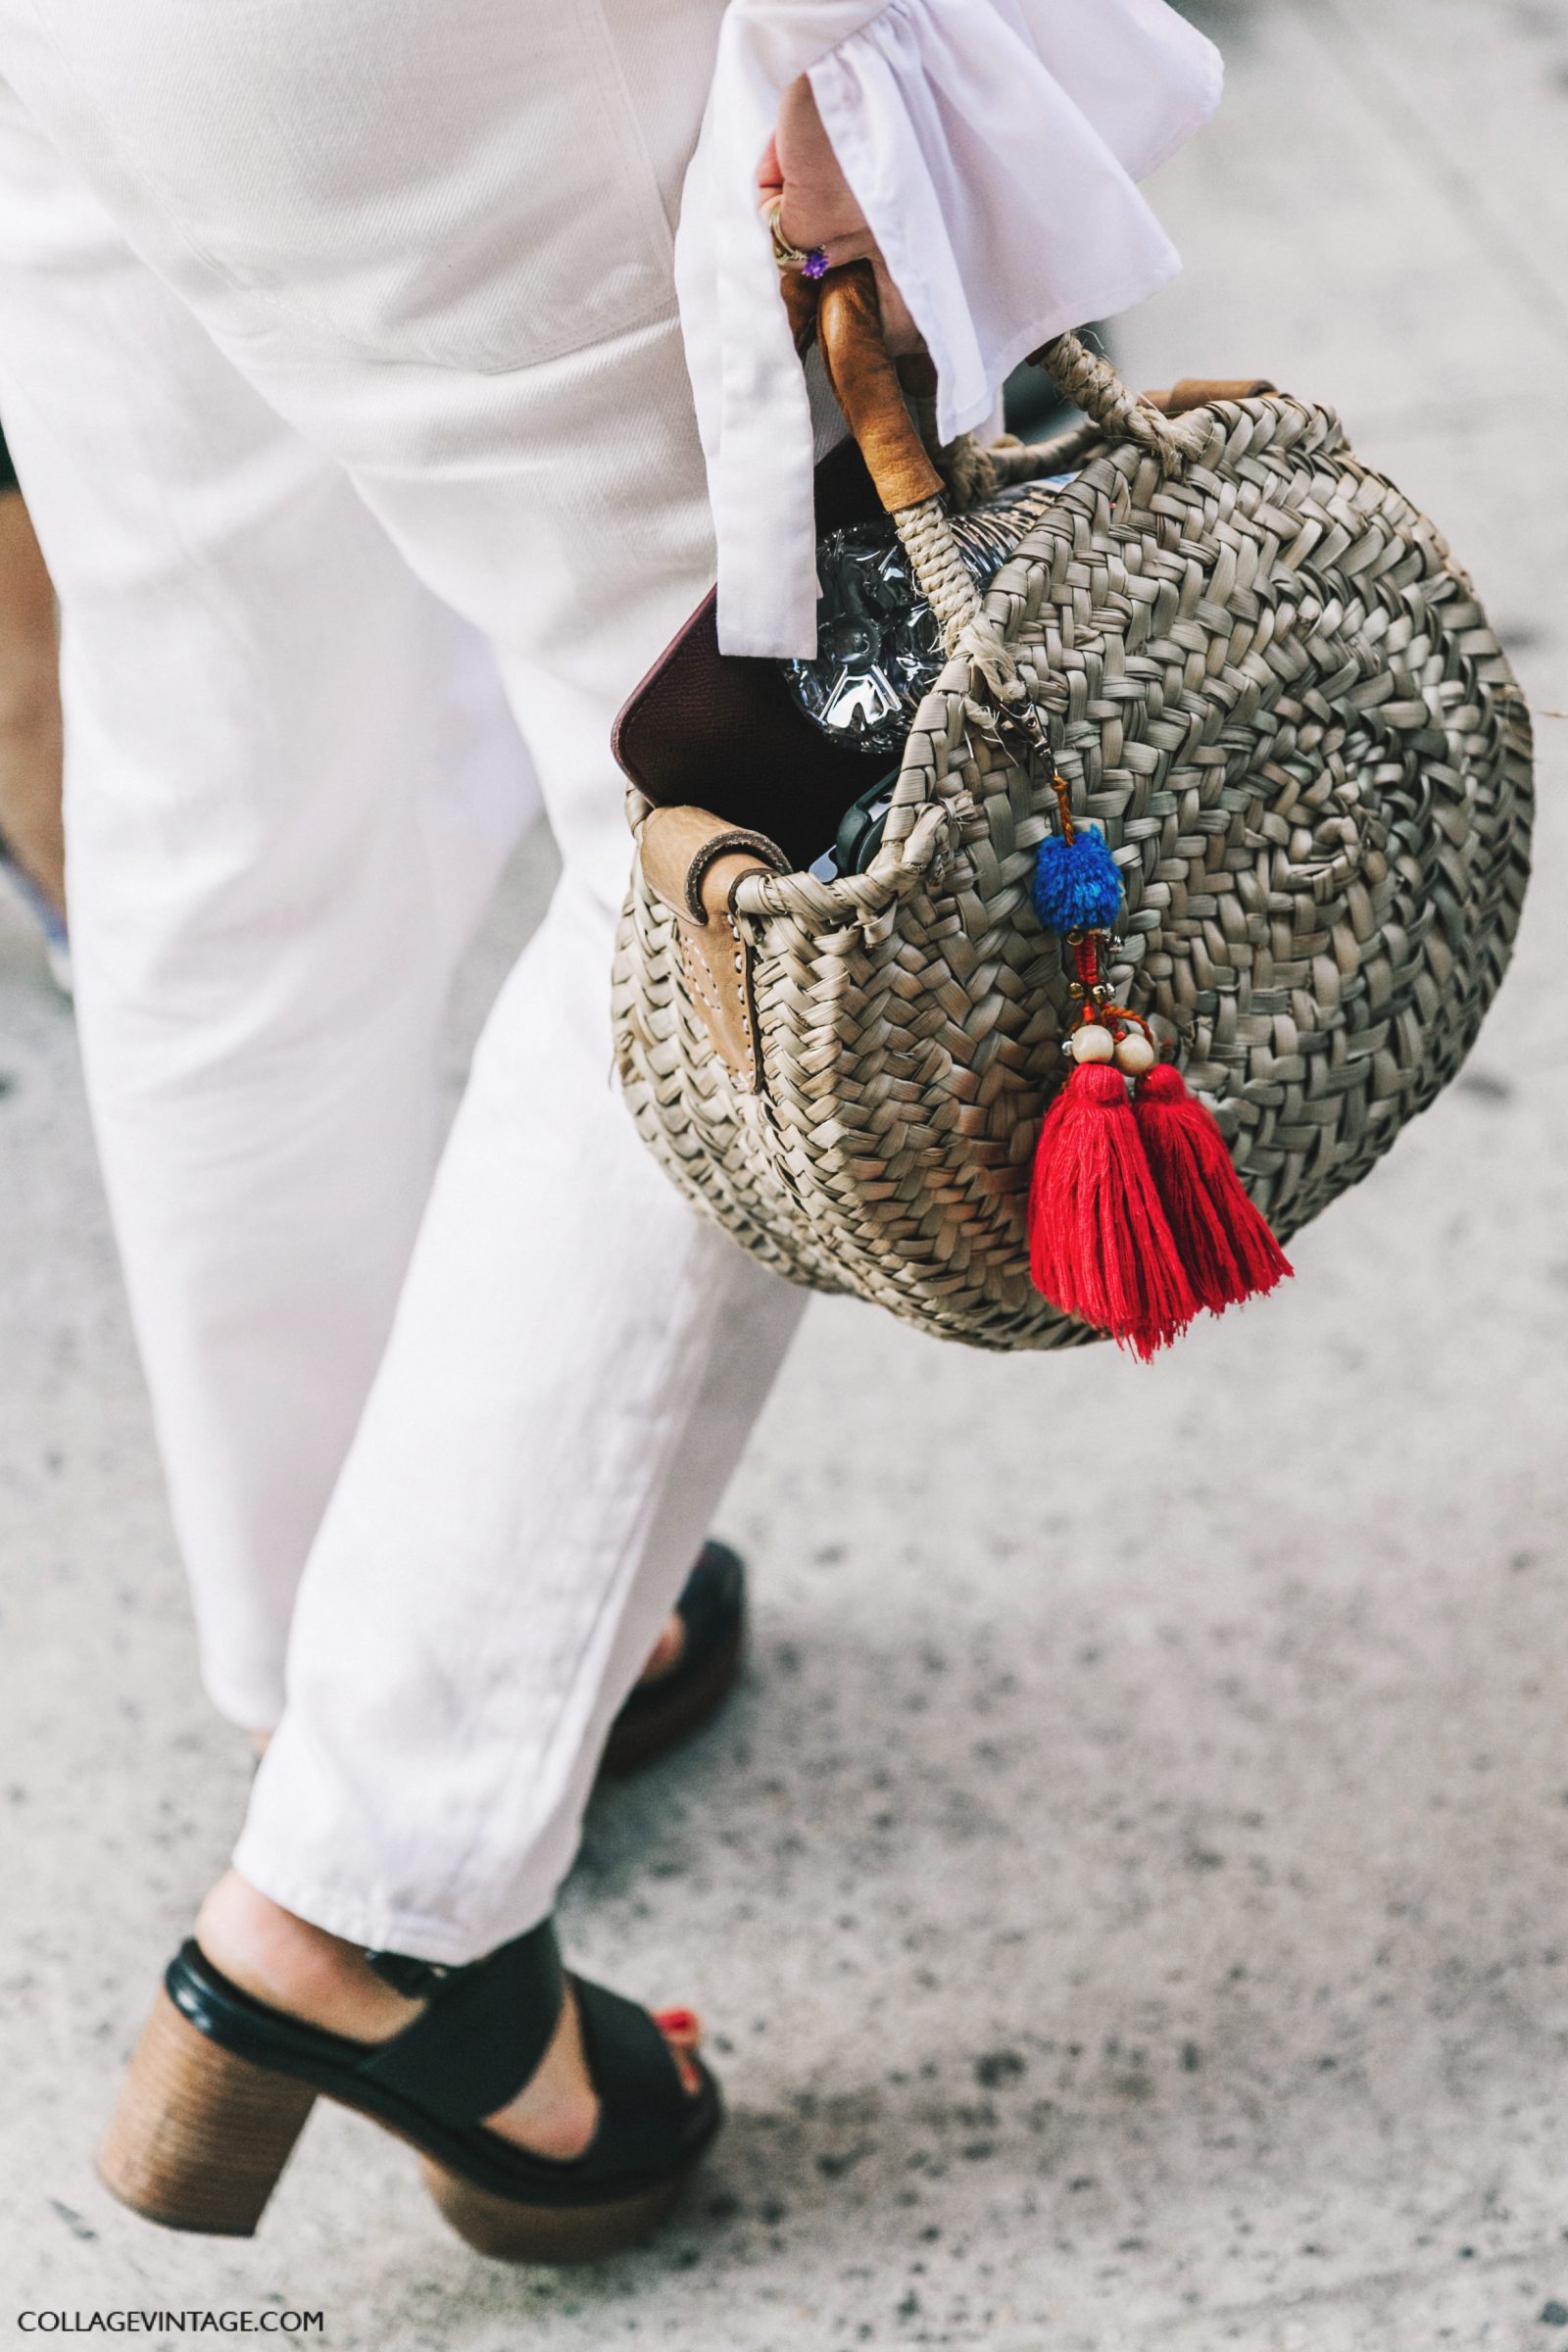 nyfw-new_york_fashion_week_ss17-street_style-outfits-collage_vintage-basket